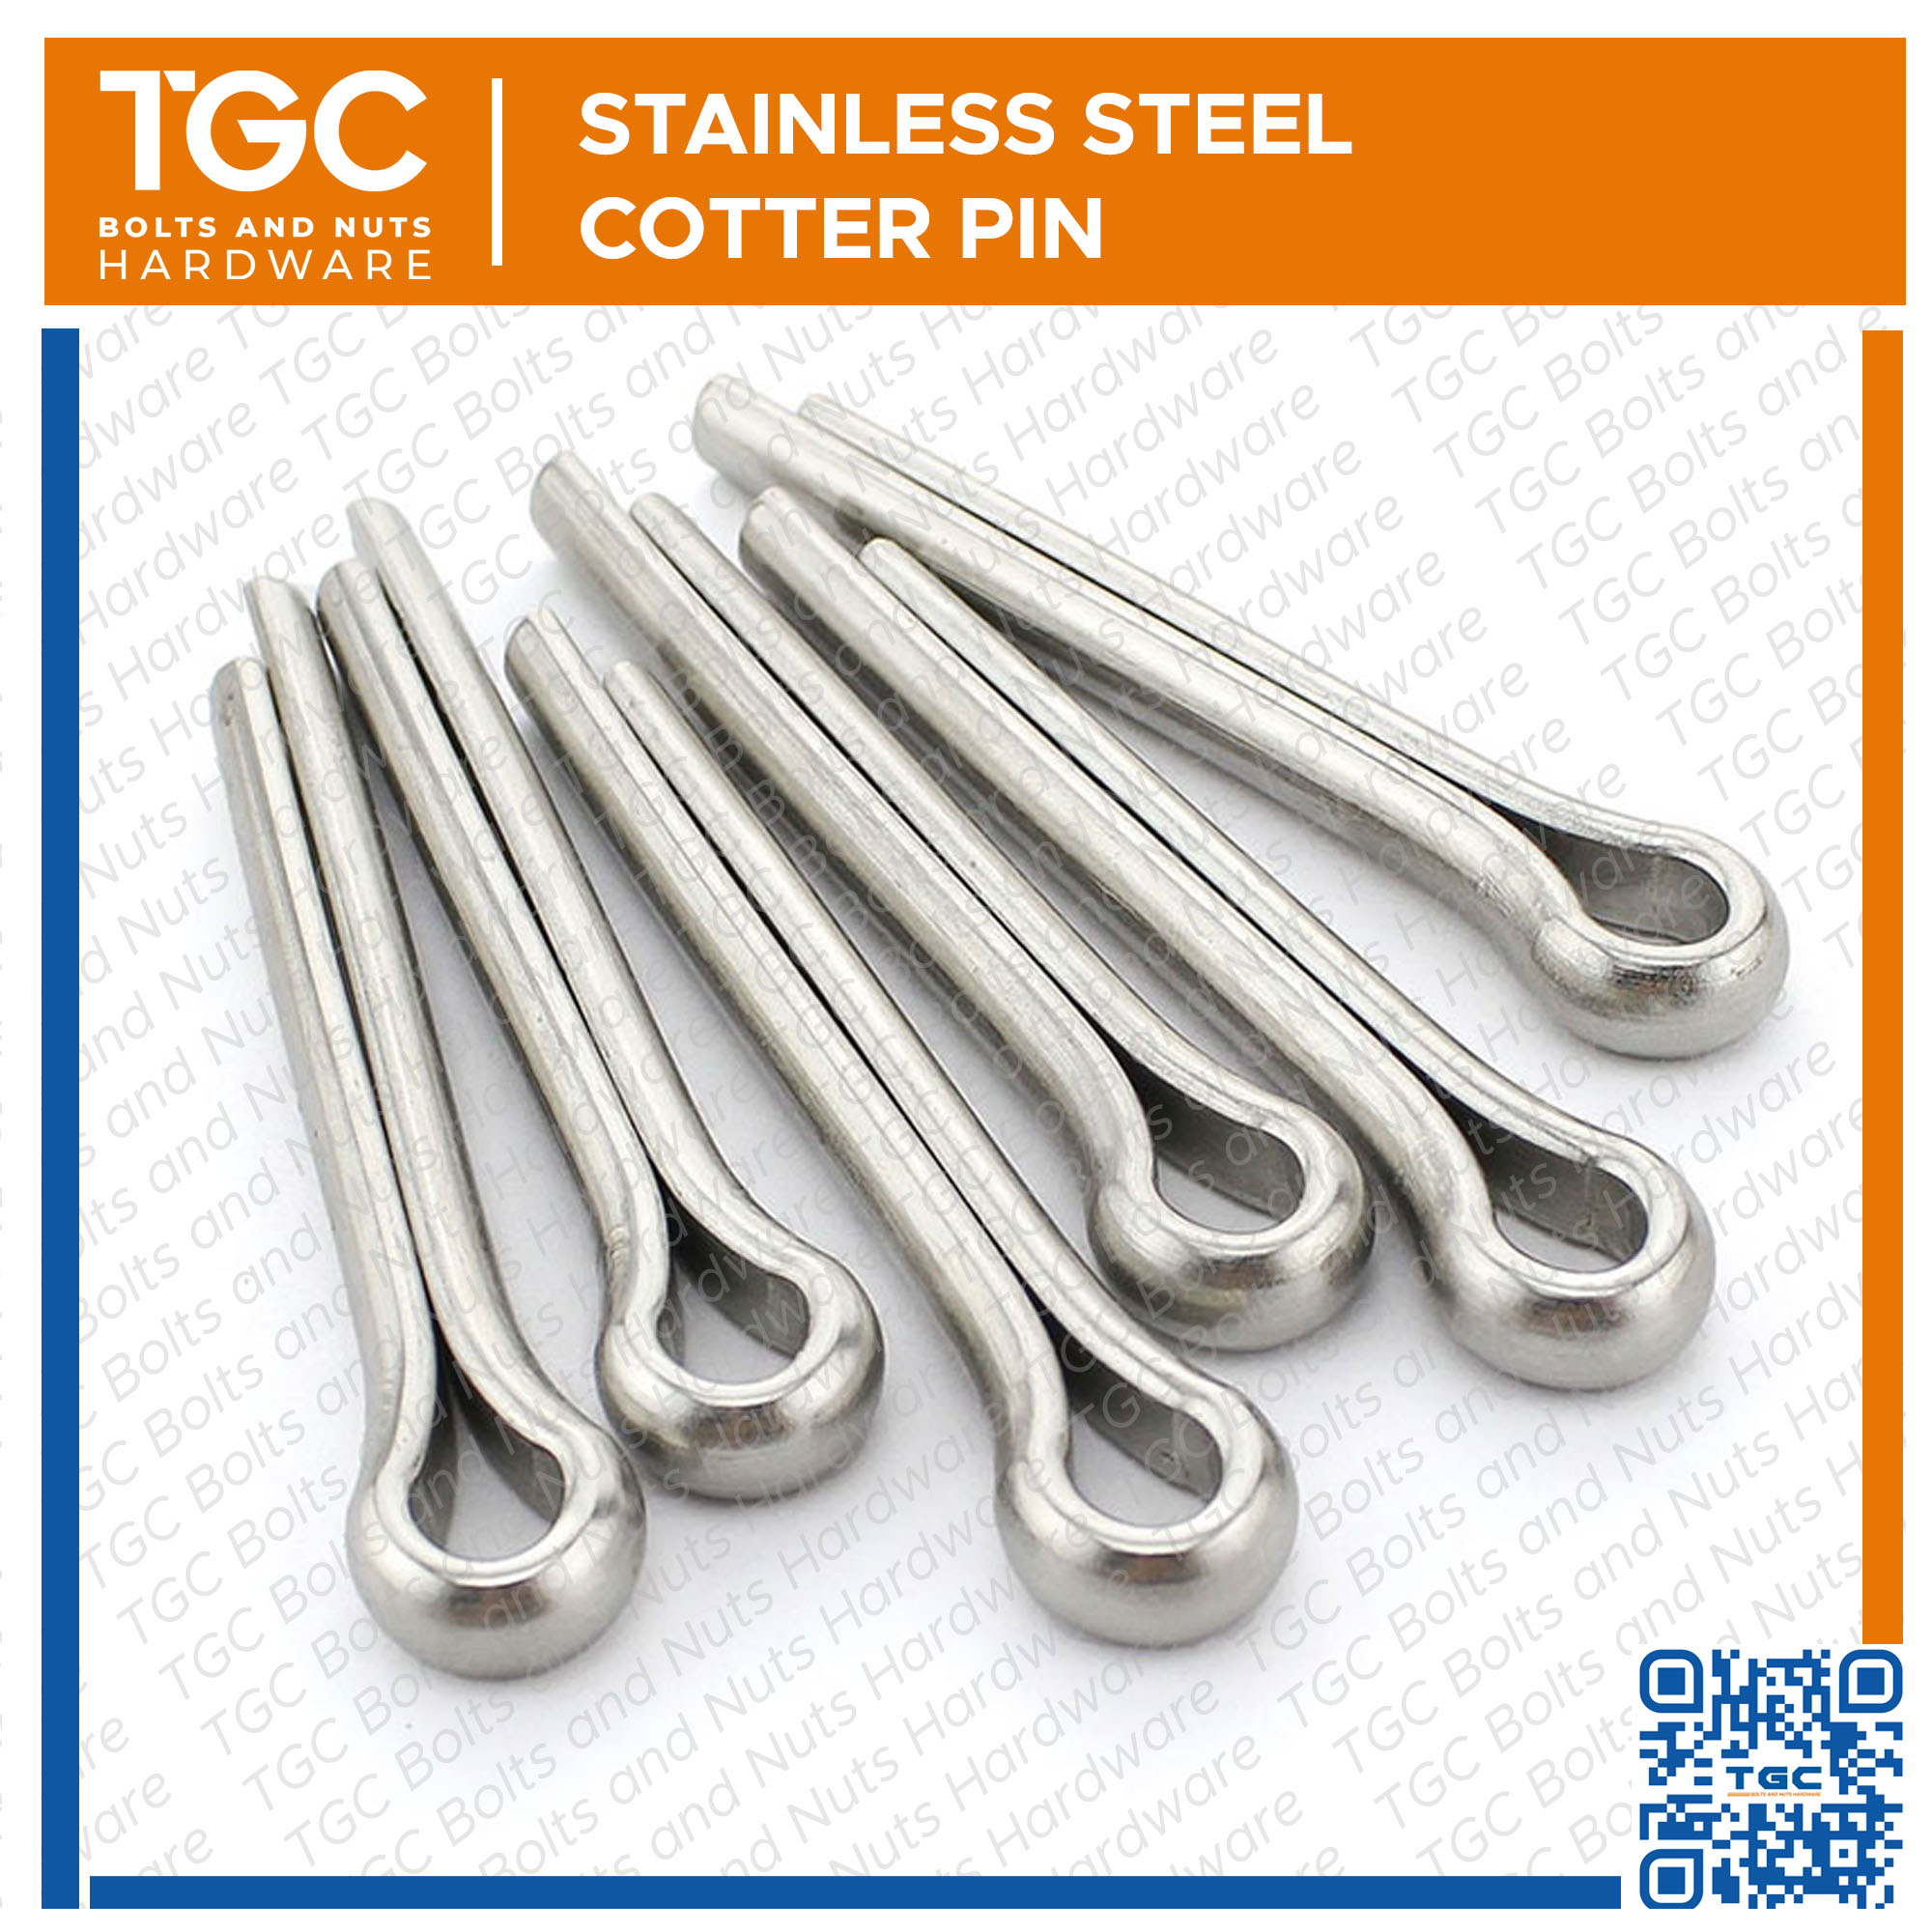 5/32" x 2 1/2" Stainless Steel SS Cotter Pin Bag of 25 